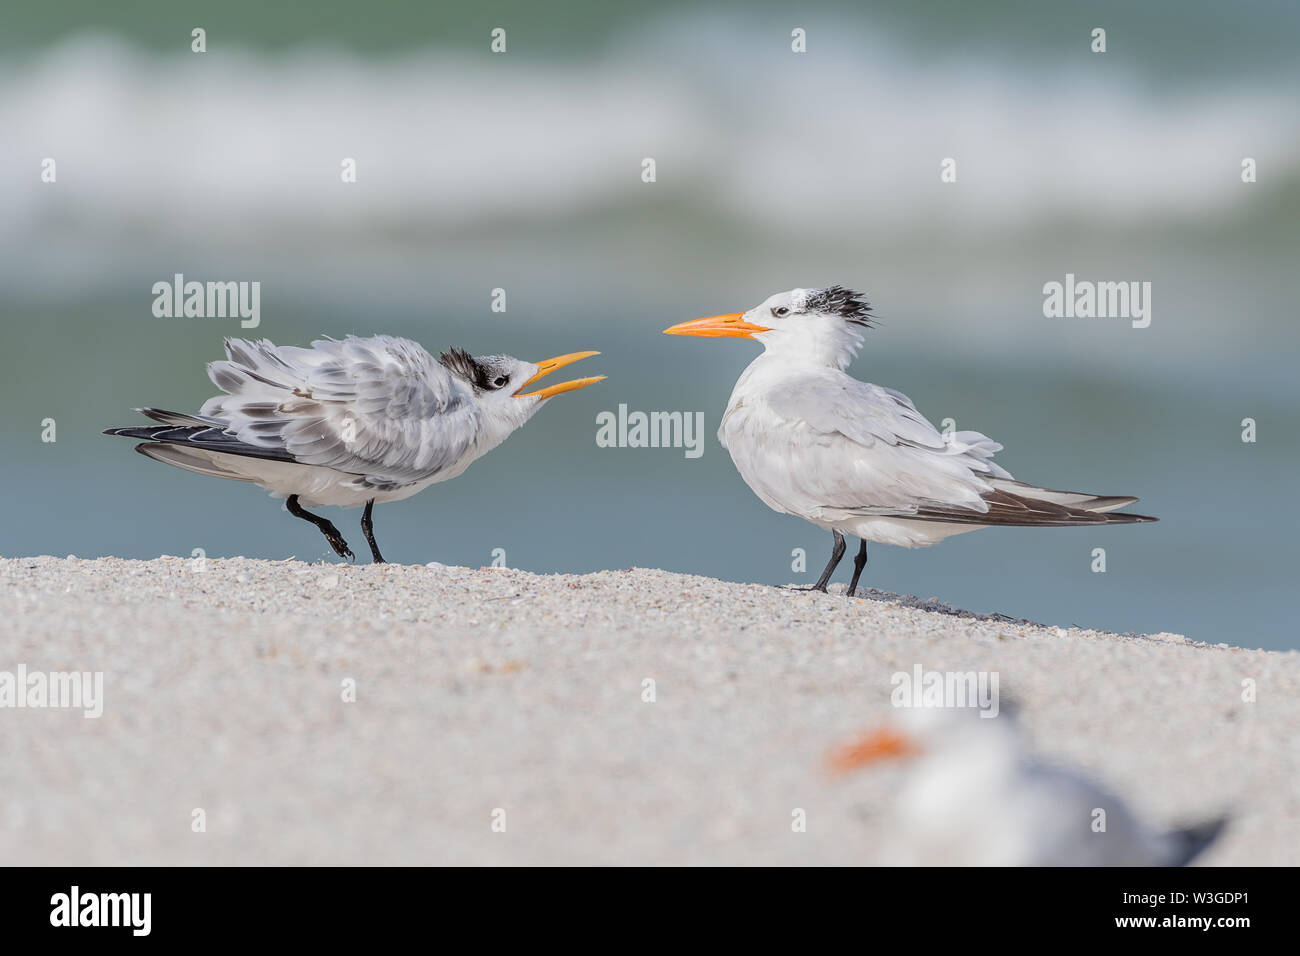 Young royal tern demanding food from its parent Stock Photo